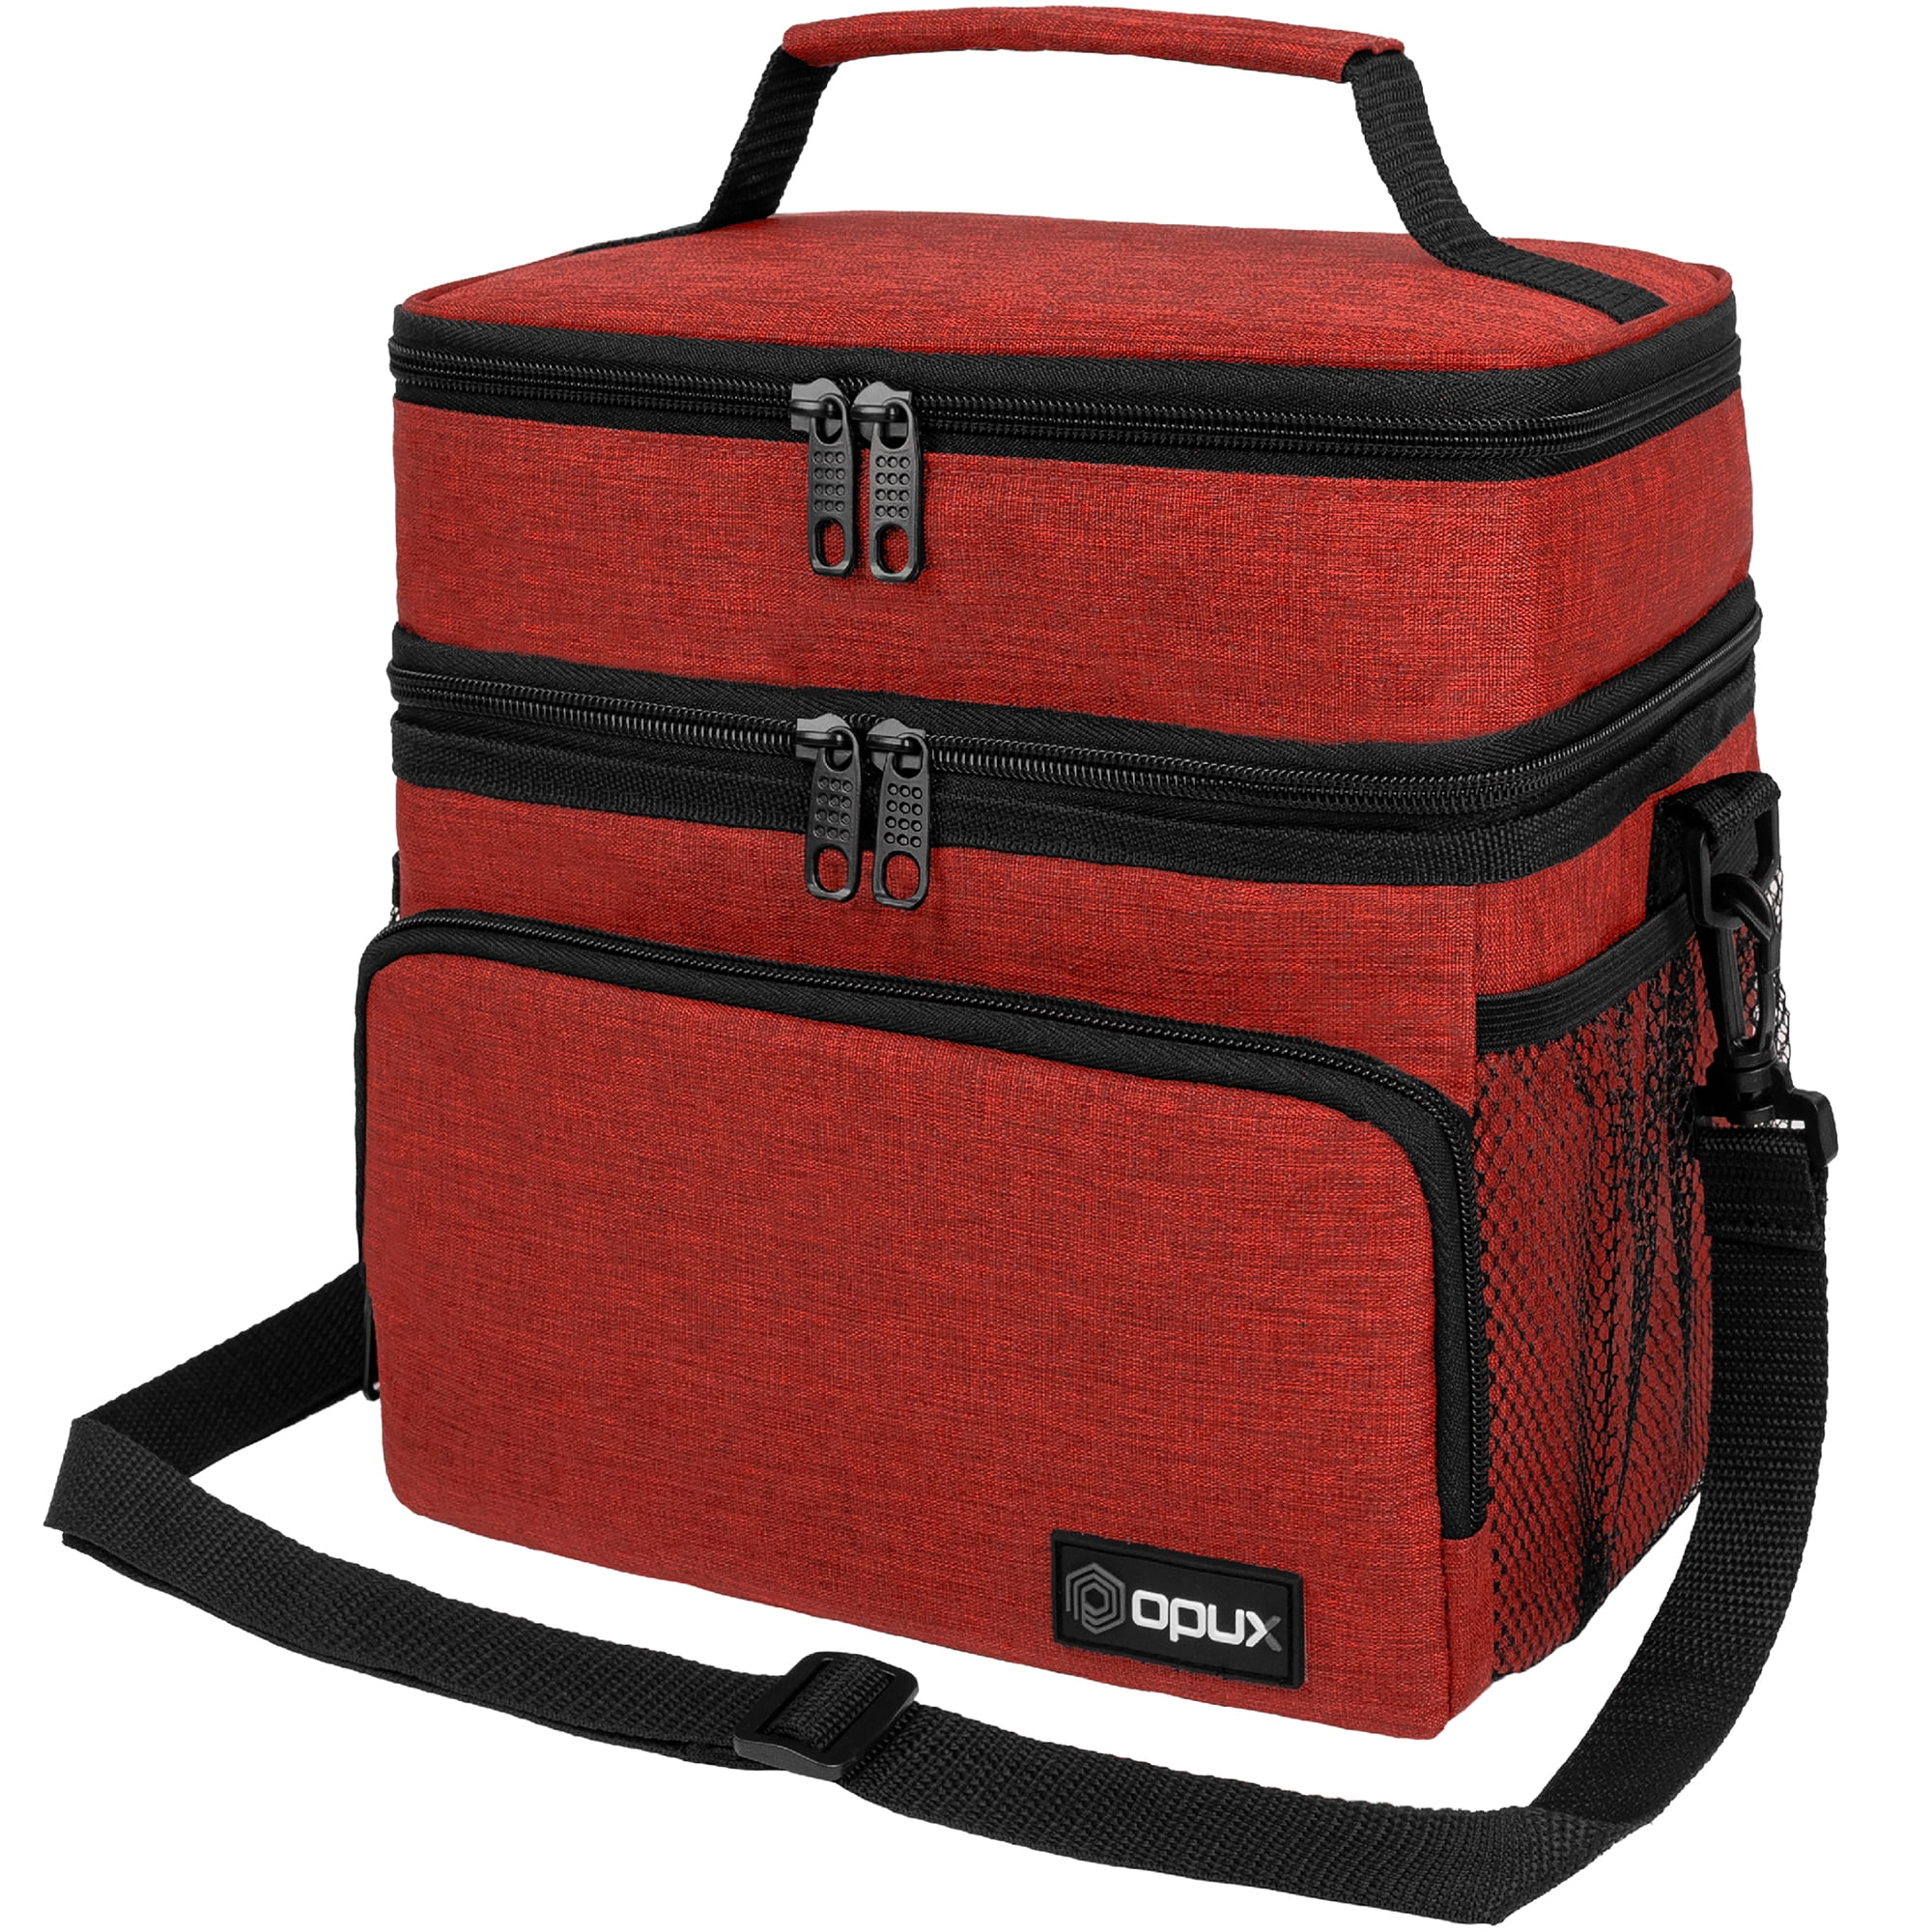 OPUX Insulated Lunch Bag for Men Women, Large Dual Compartment Cooler ...